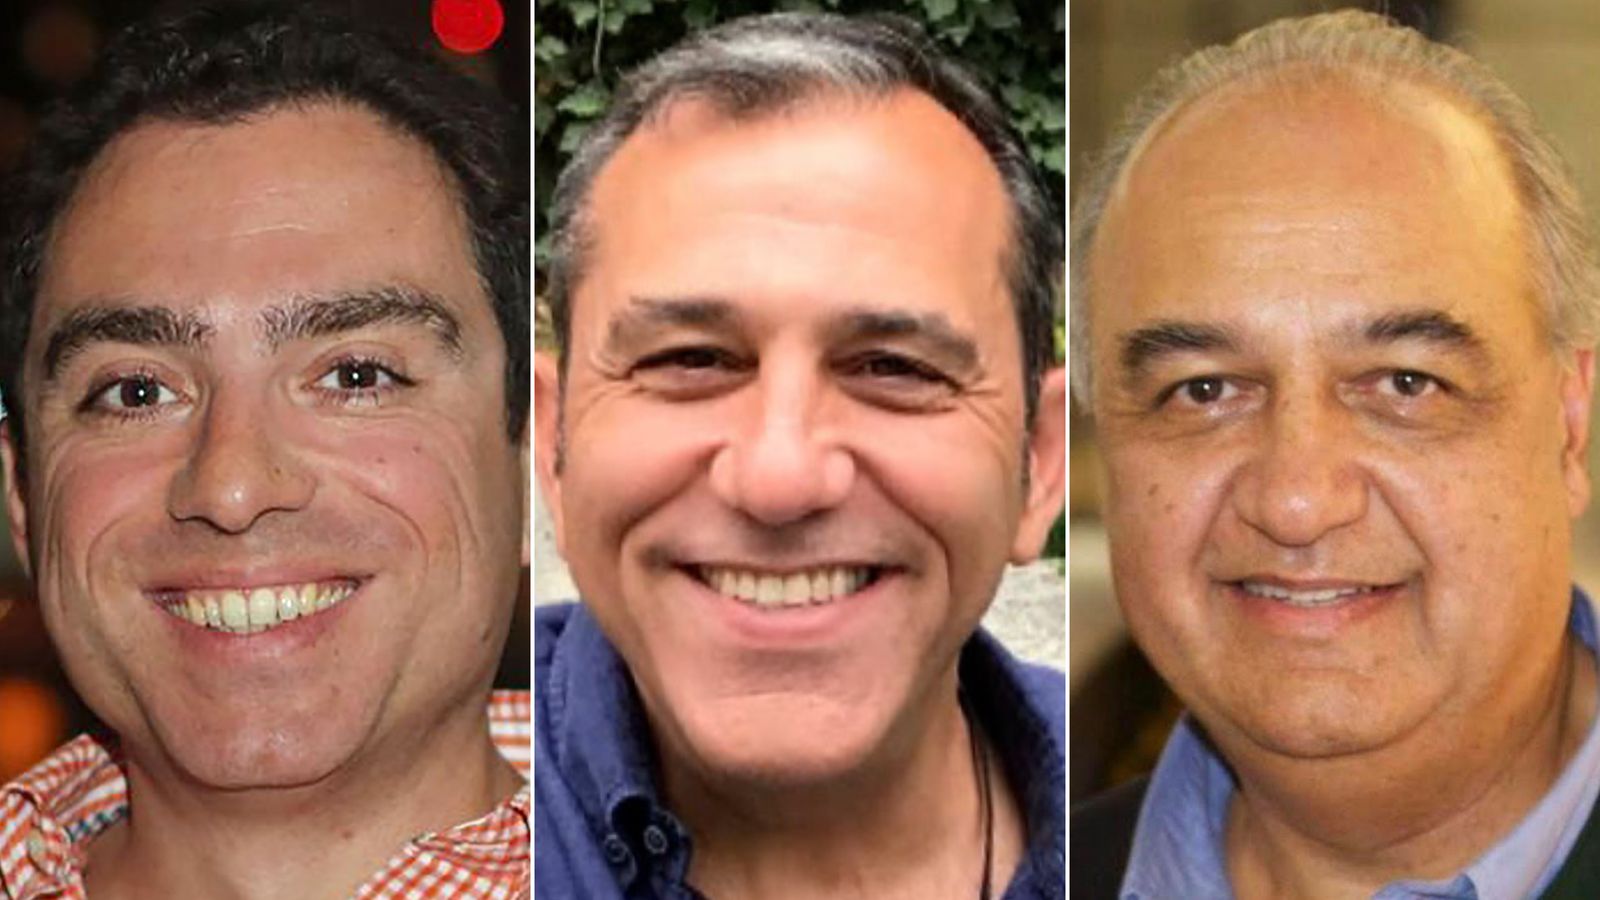 Siamak Namazi, Emad Shargi and Morad Tahbaz were among the Americans believed to be involved in the...